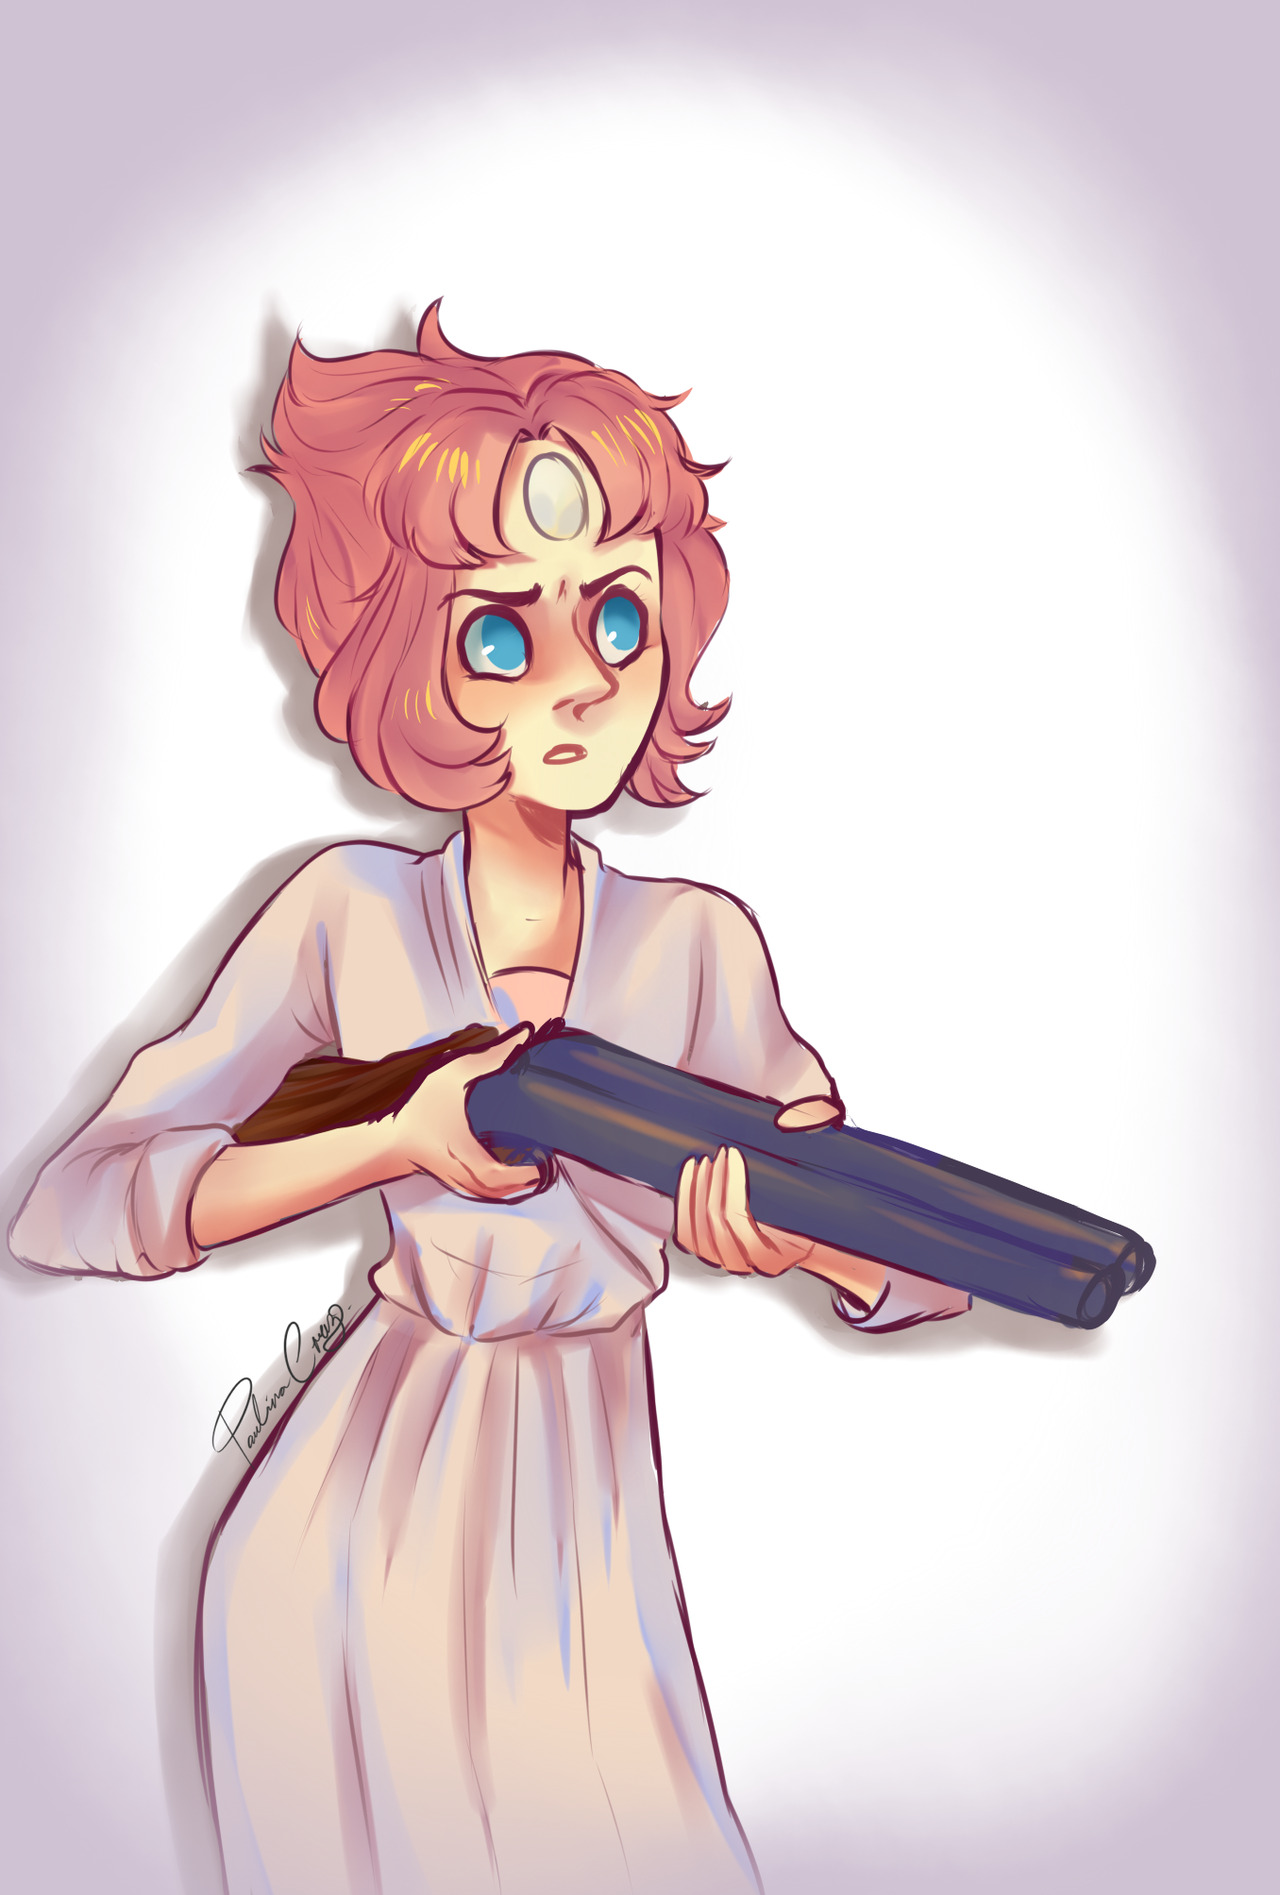 Why you have a gun in your gem, Pearl??? -quick doodle-